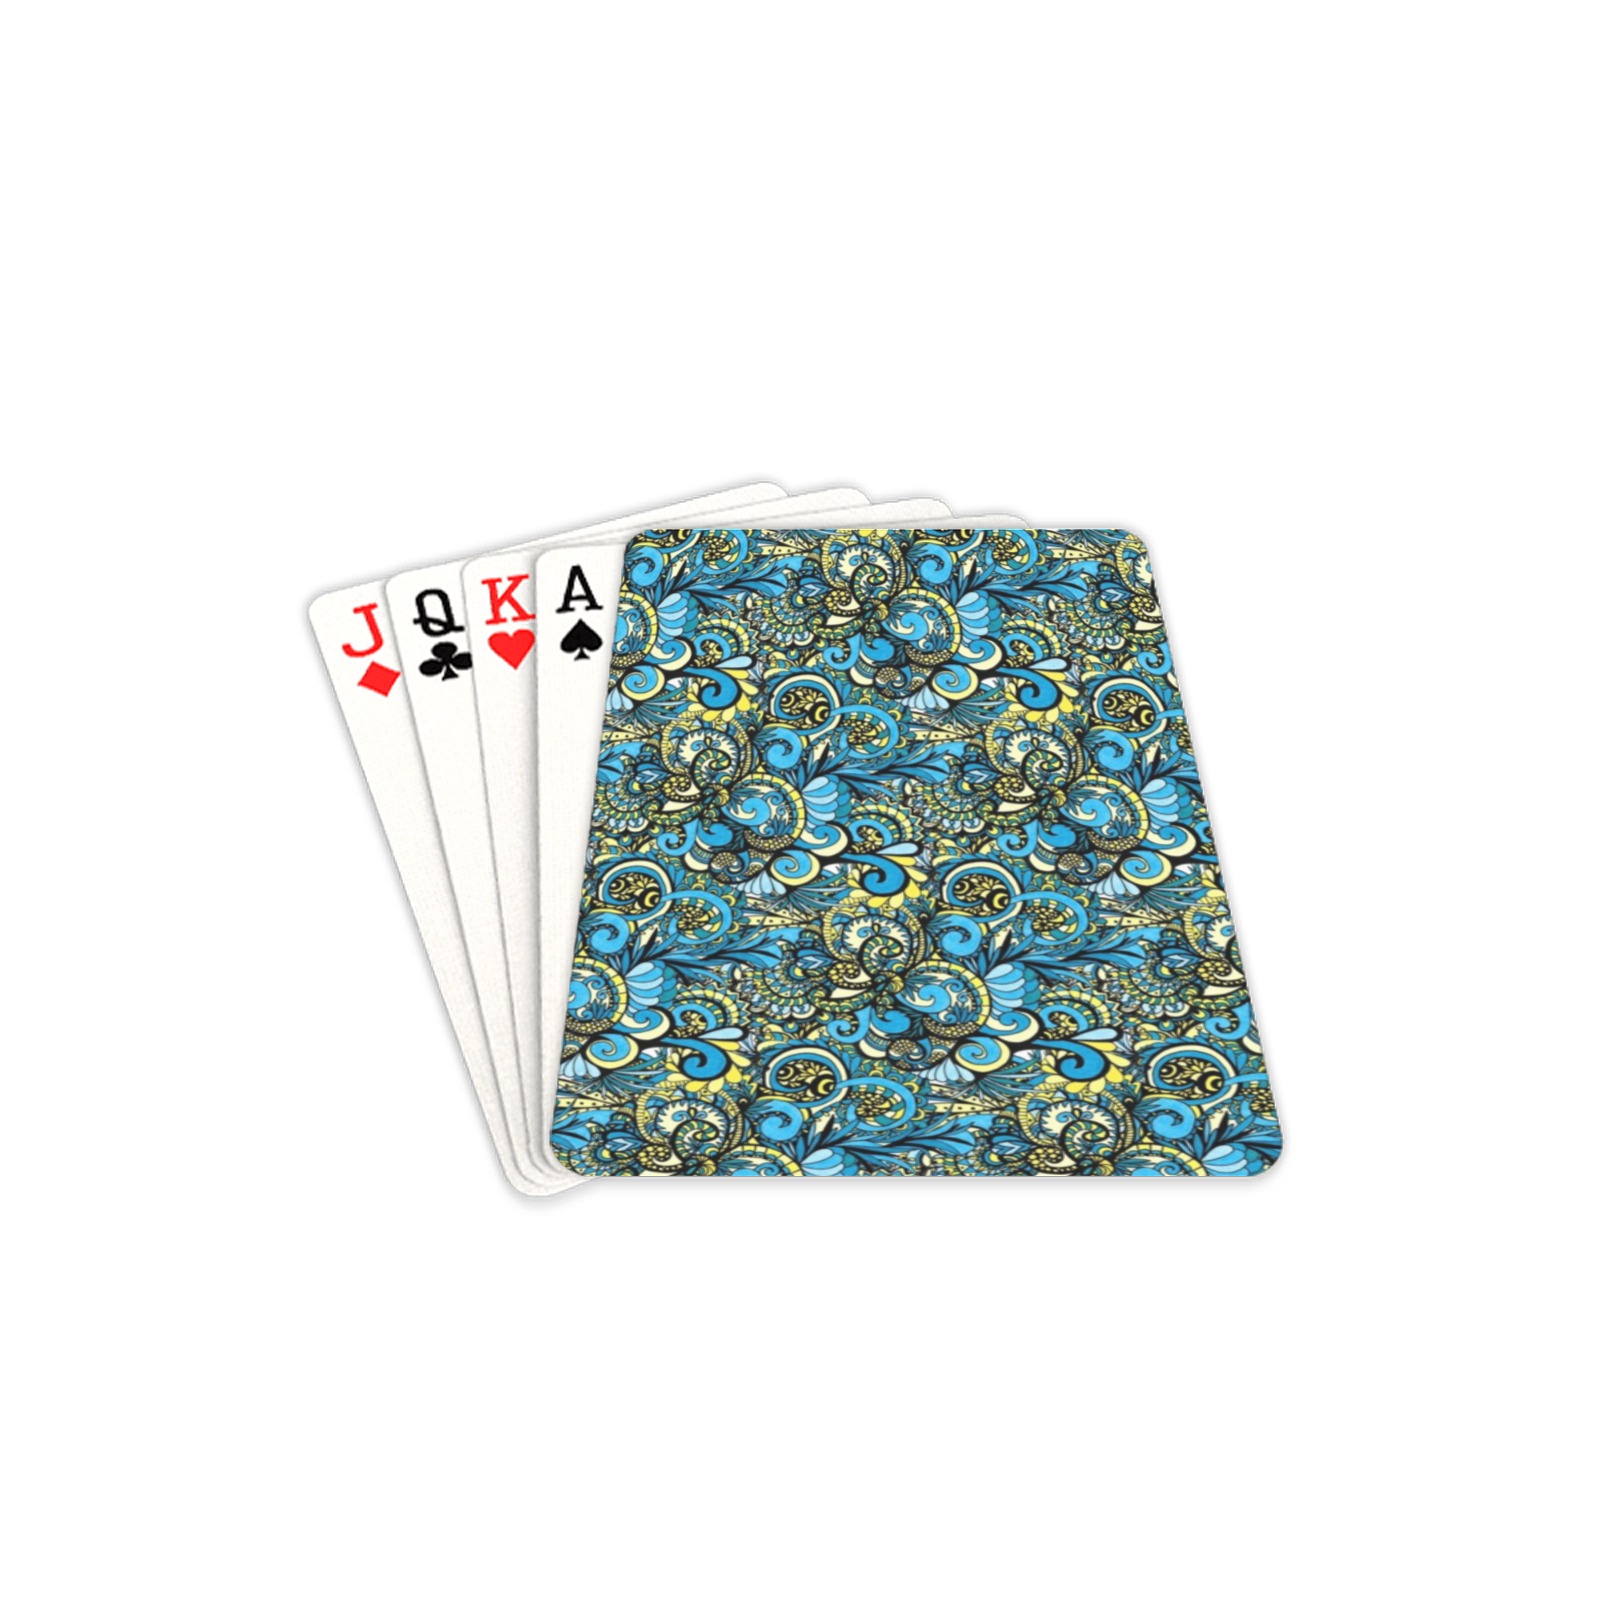 Seaside Rendezvous Playing Cards 2.5"x3.5"